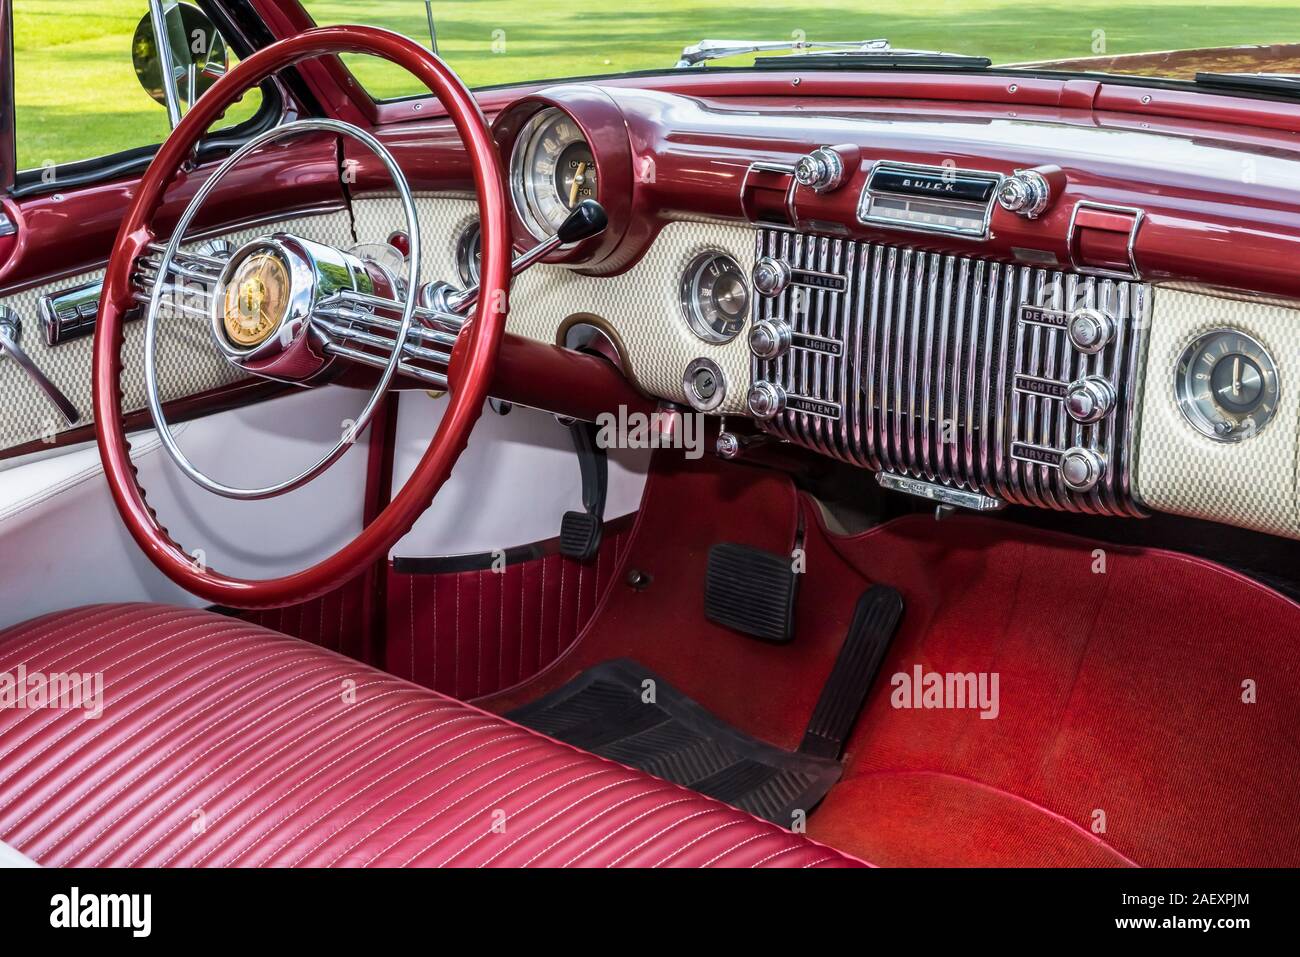 PLYMOUTH, MI/USA - JULY 28, 2019: Closeup of a 1953 Buick Skylark dashboard on display at the Concours d'Elegance of America car show at The Inn at St Stock Photo